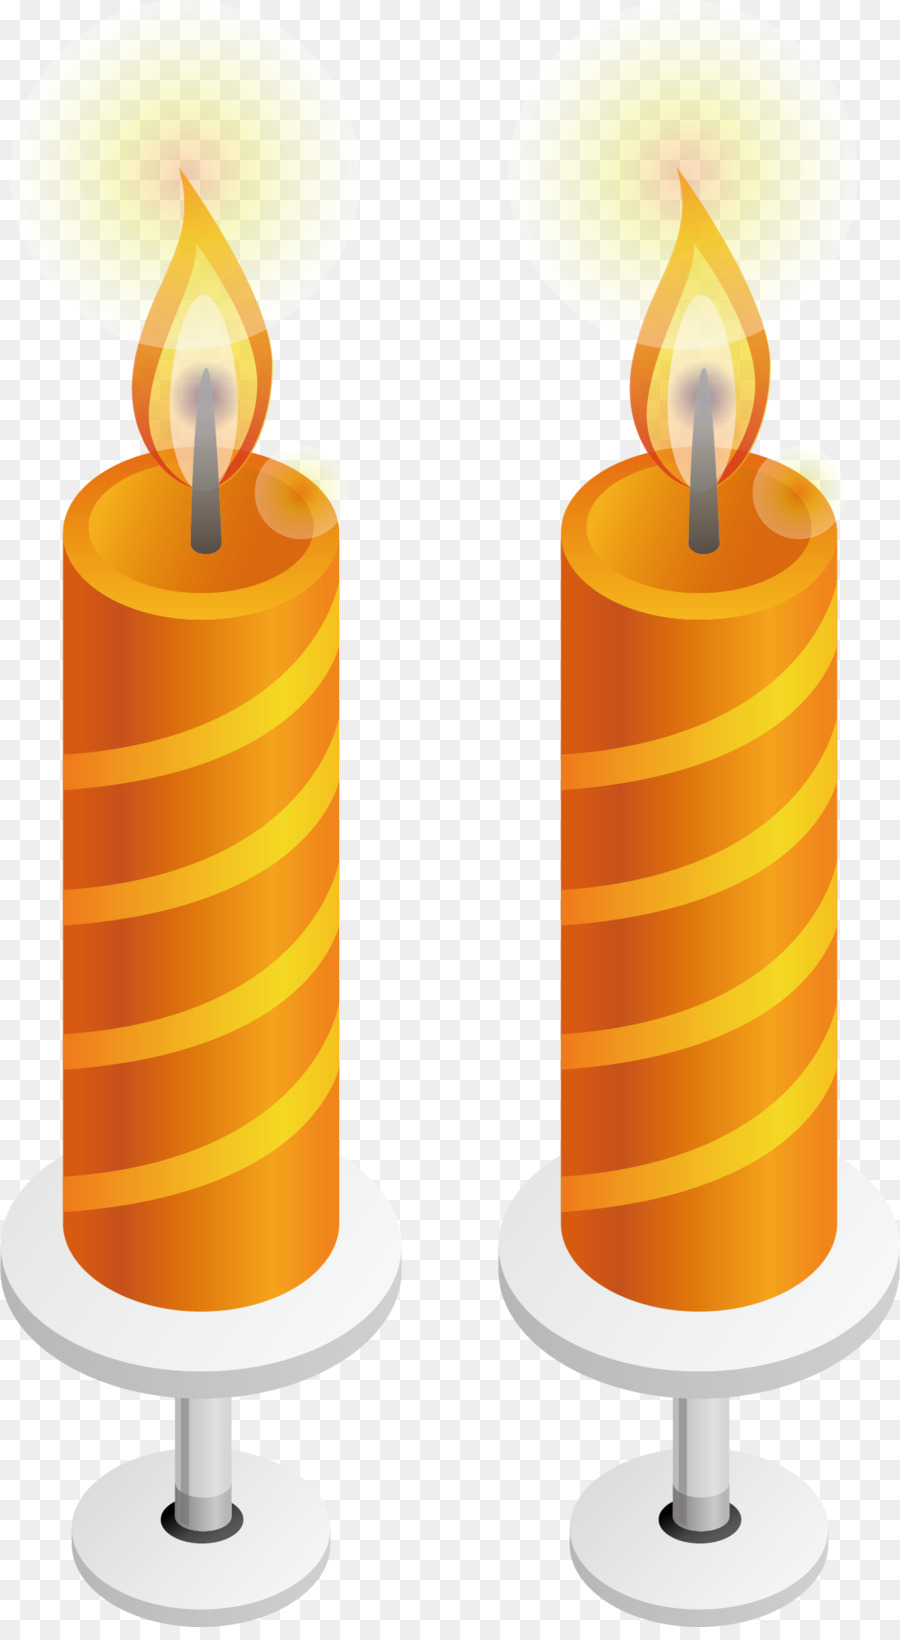 Candle Flame - Candle png vector element png download - 1207*2182 - Free Transparent Candle png Download.